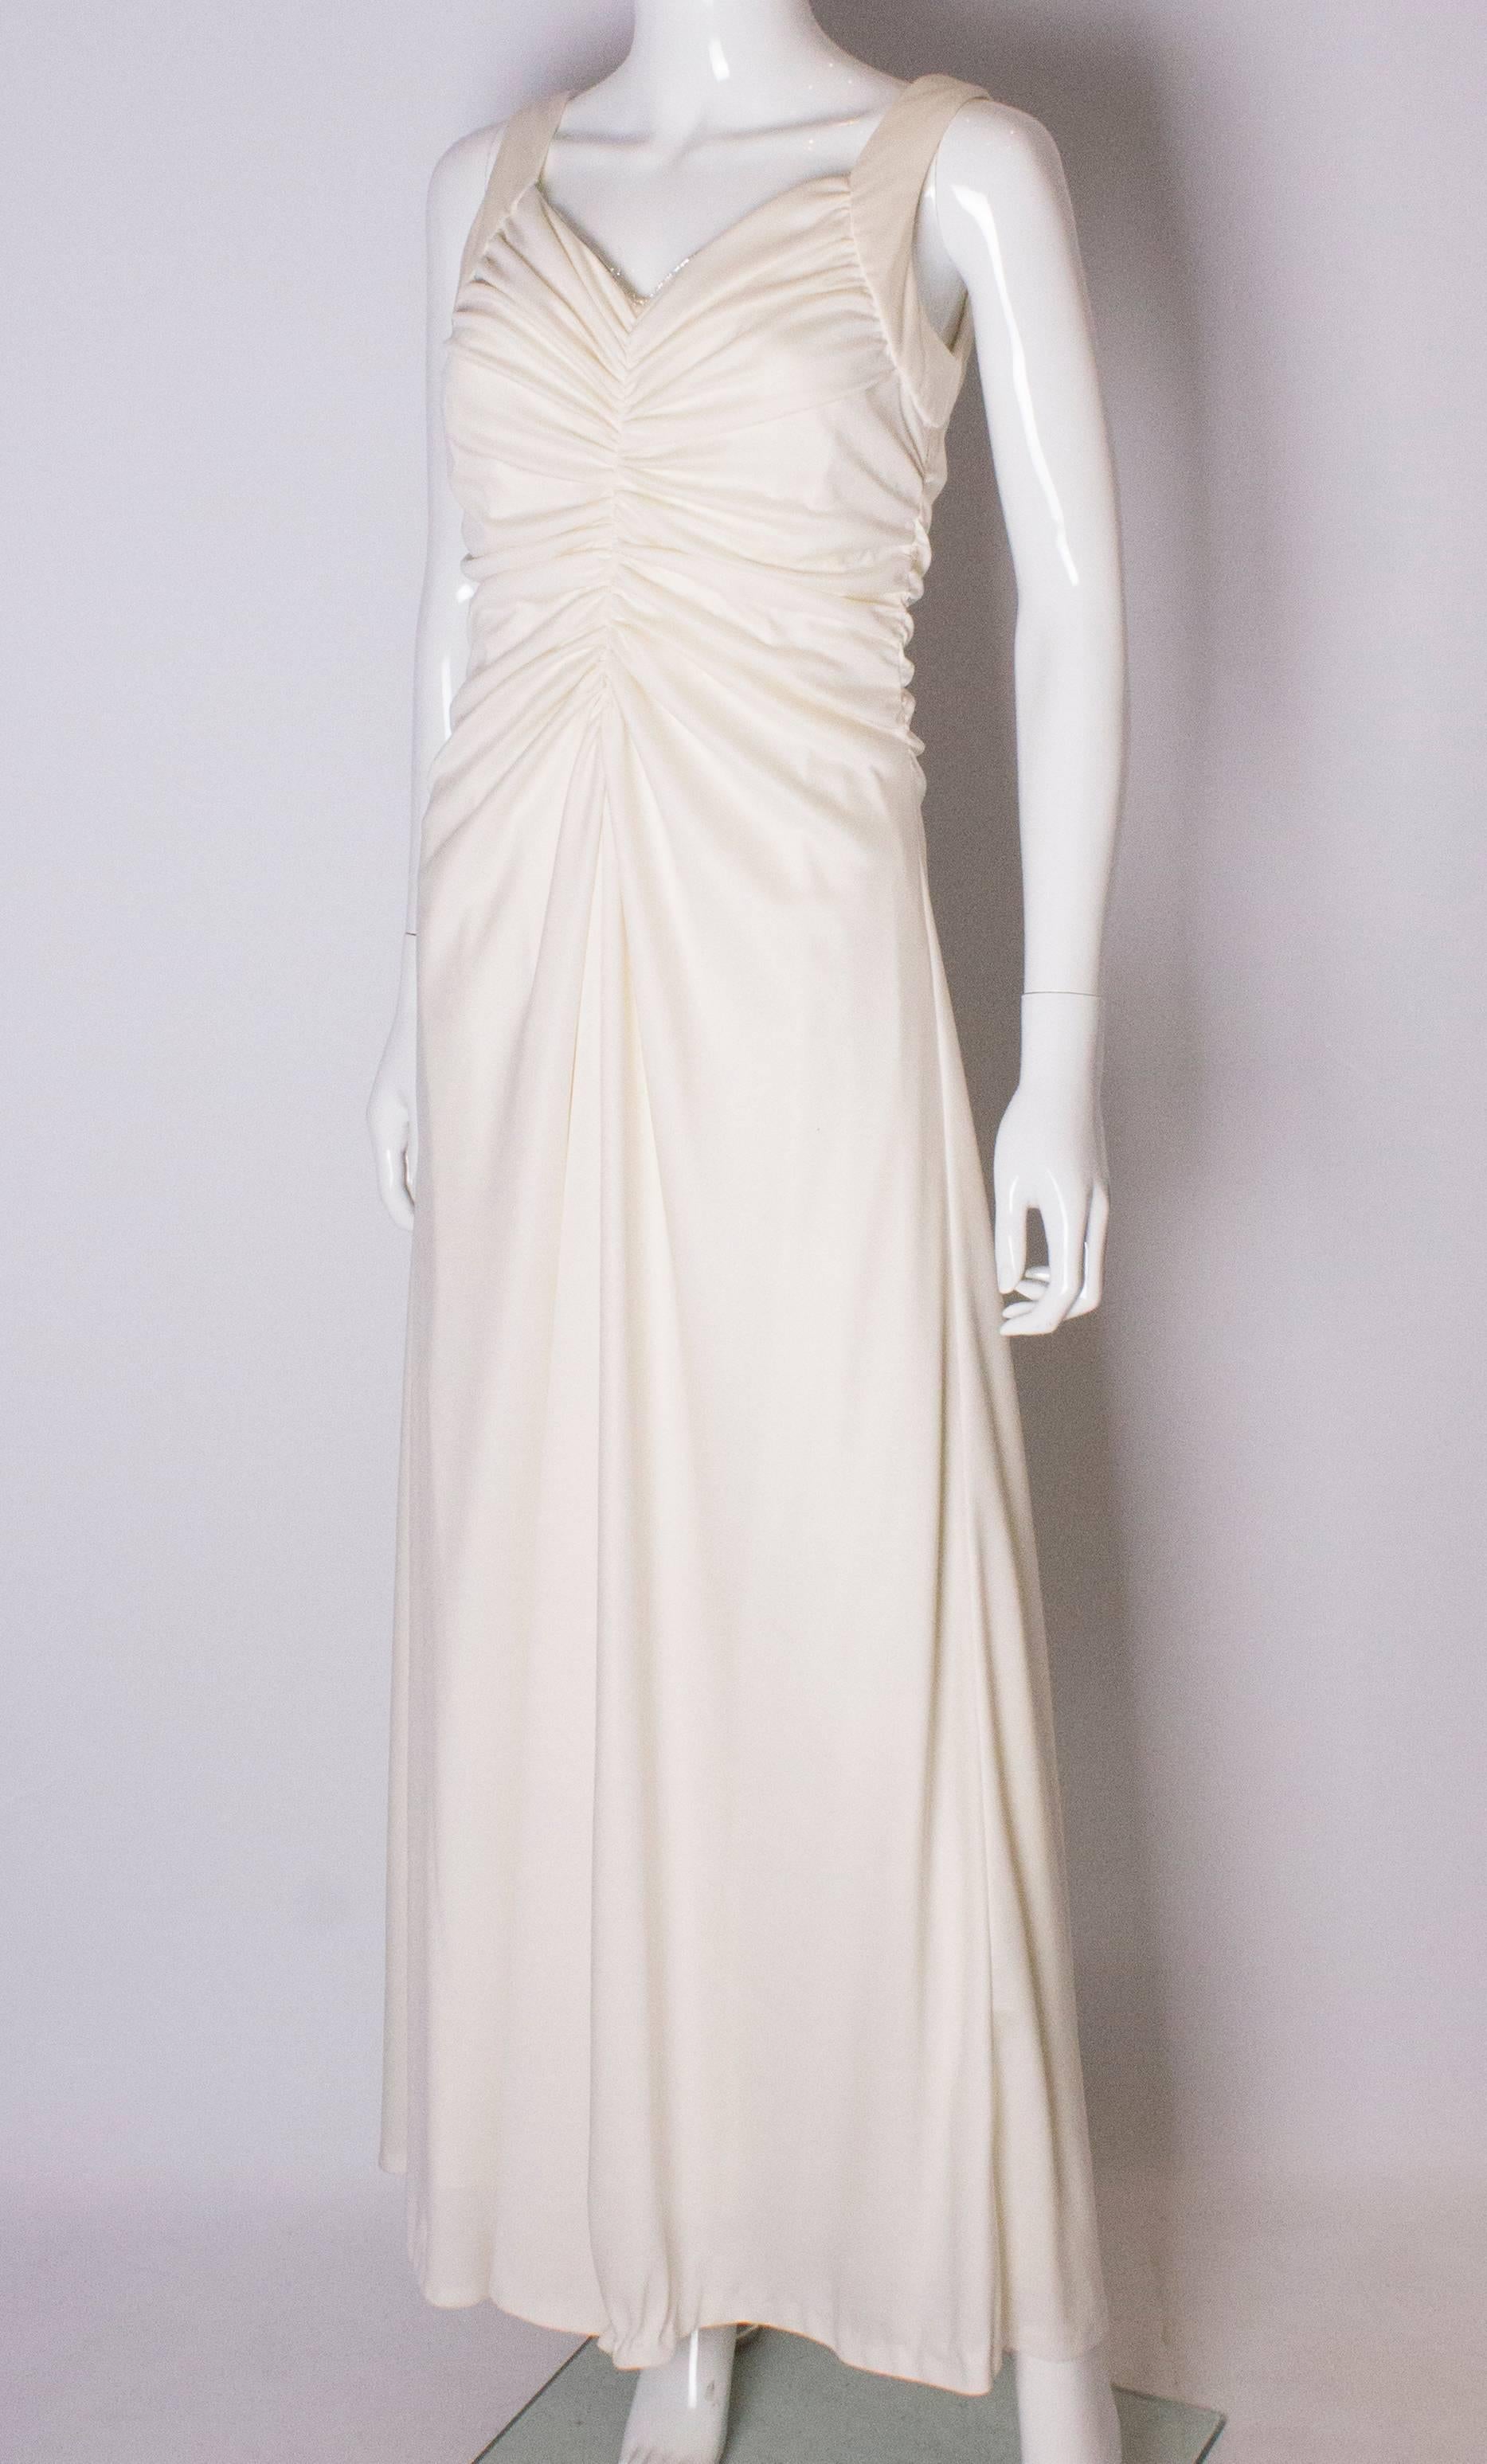 Gray A Vintage 1970s cream evening dress by Maddison Avenue London 